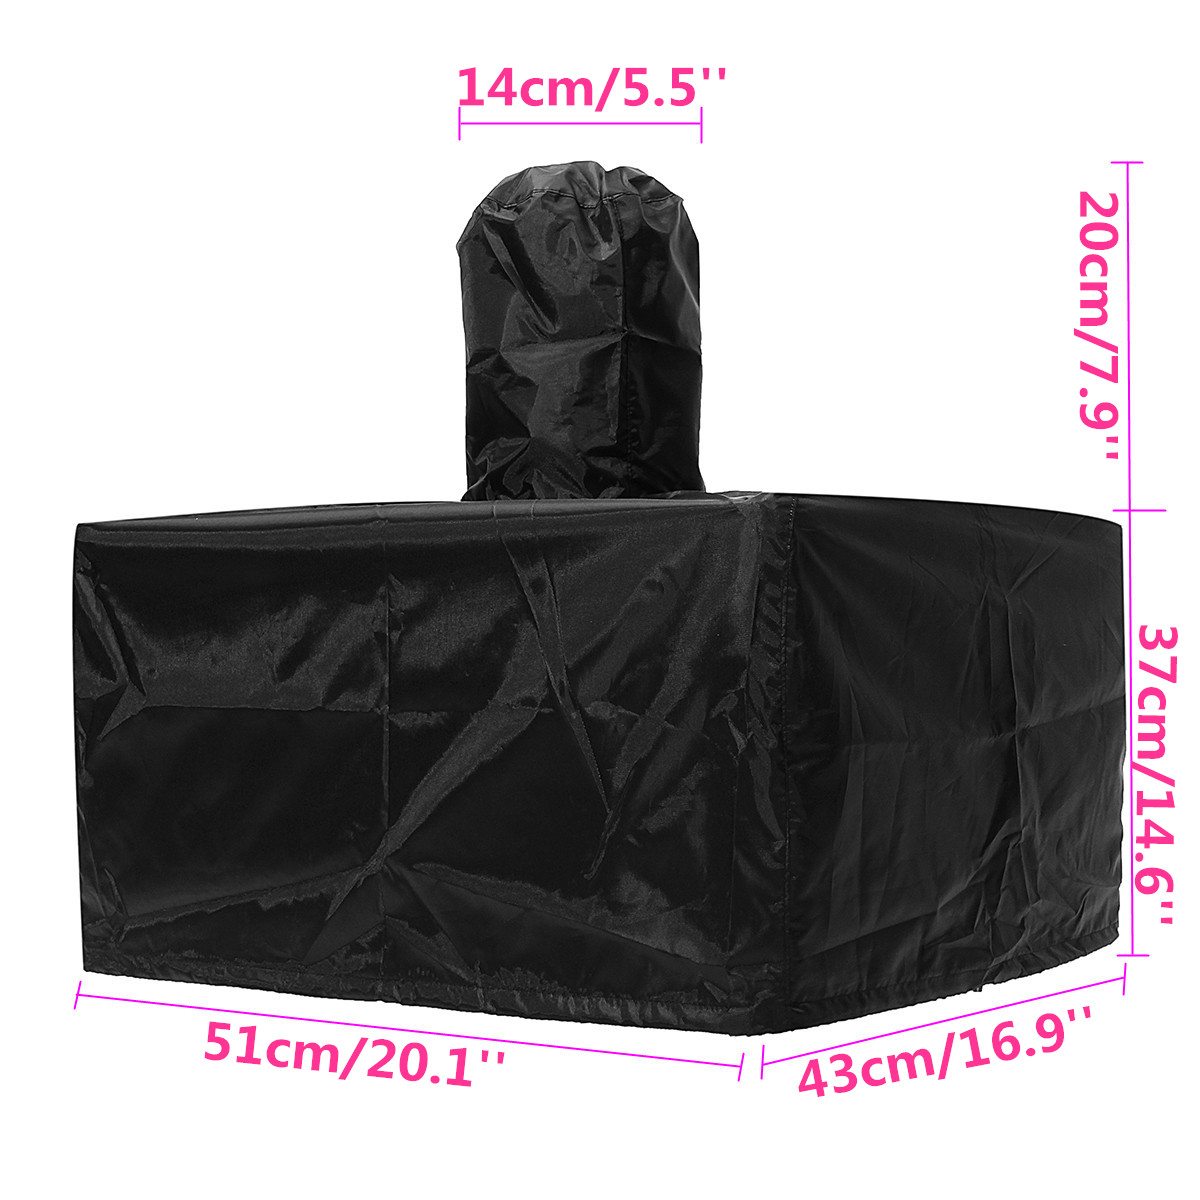 Outdoor-Pizza-Oven-Waterproof-Rain-Cover-BBQ-Charcoal-Fired-Bread-Oven-Smoker-Protector-1337984-2